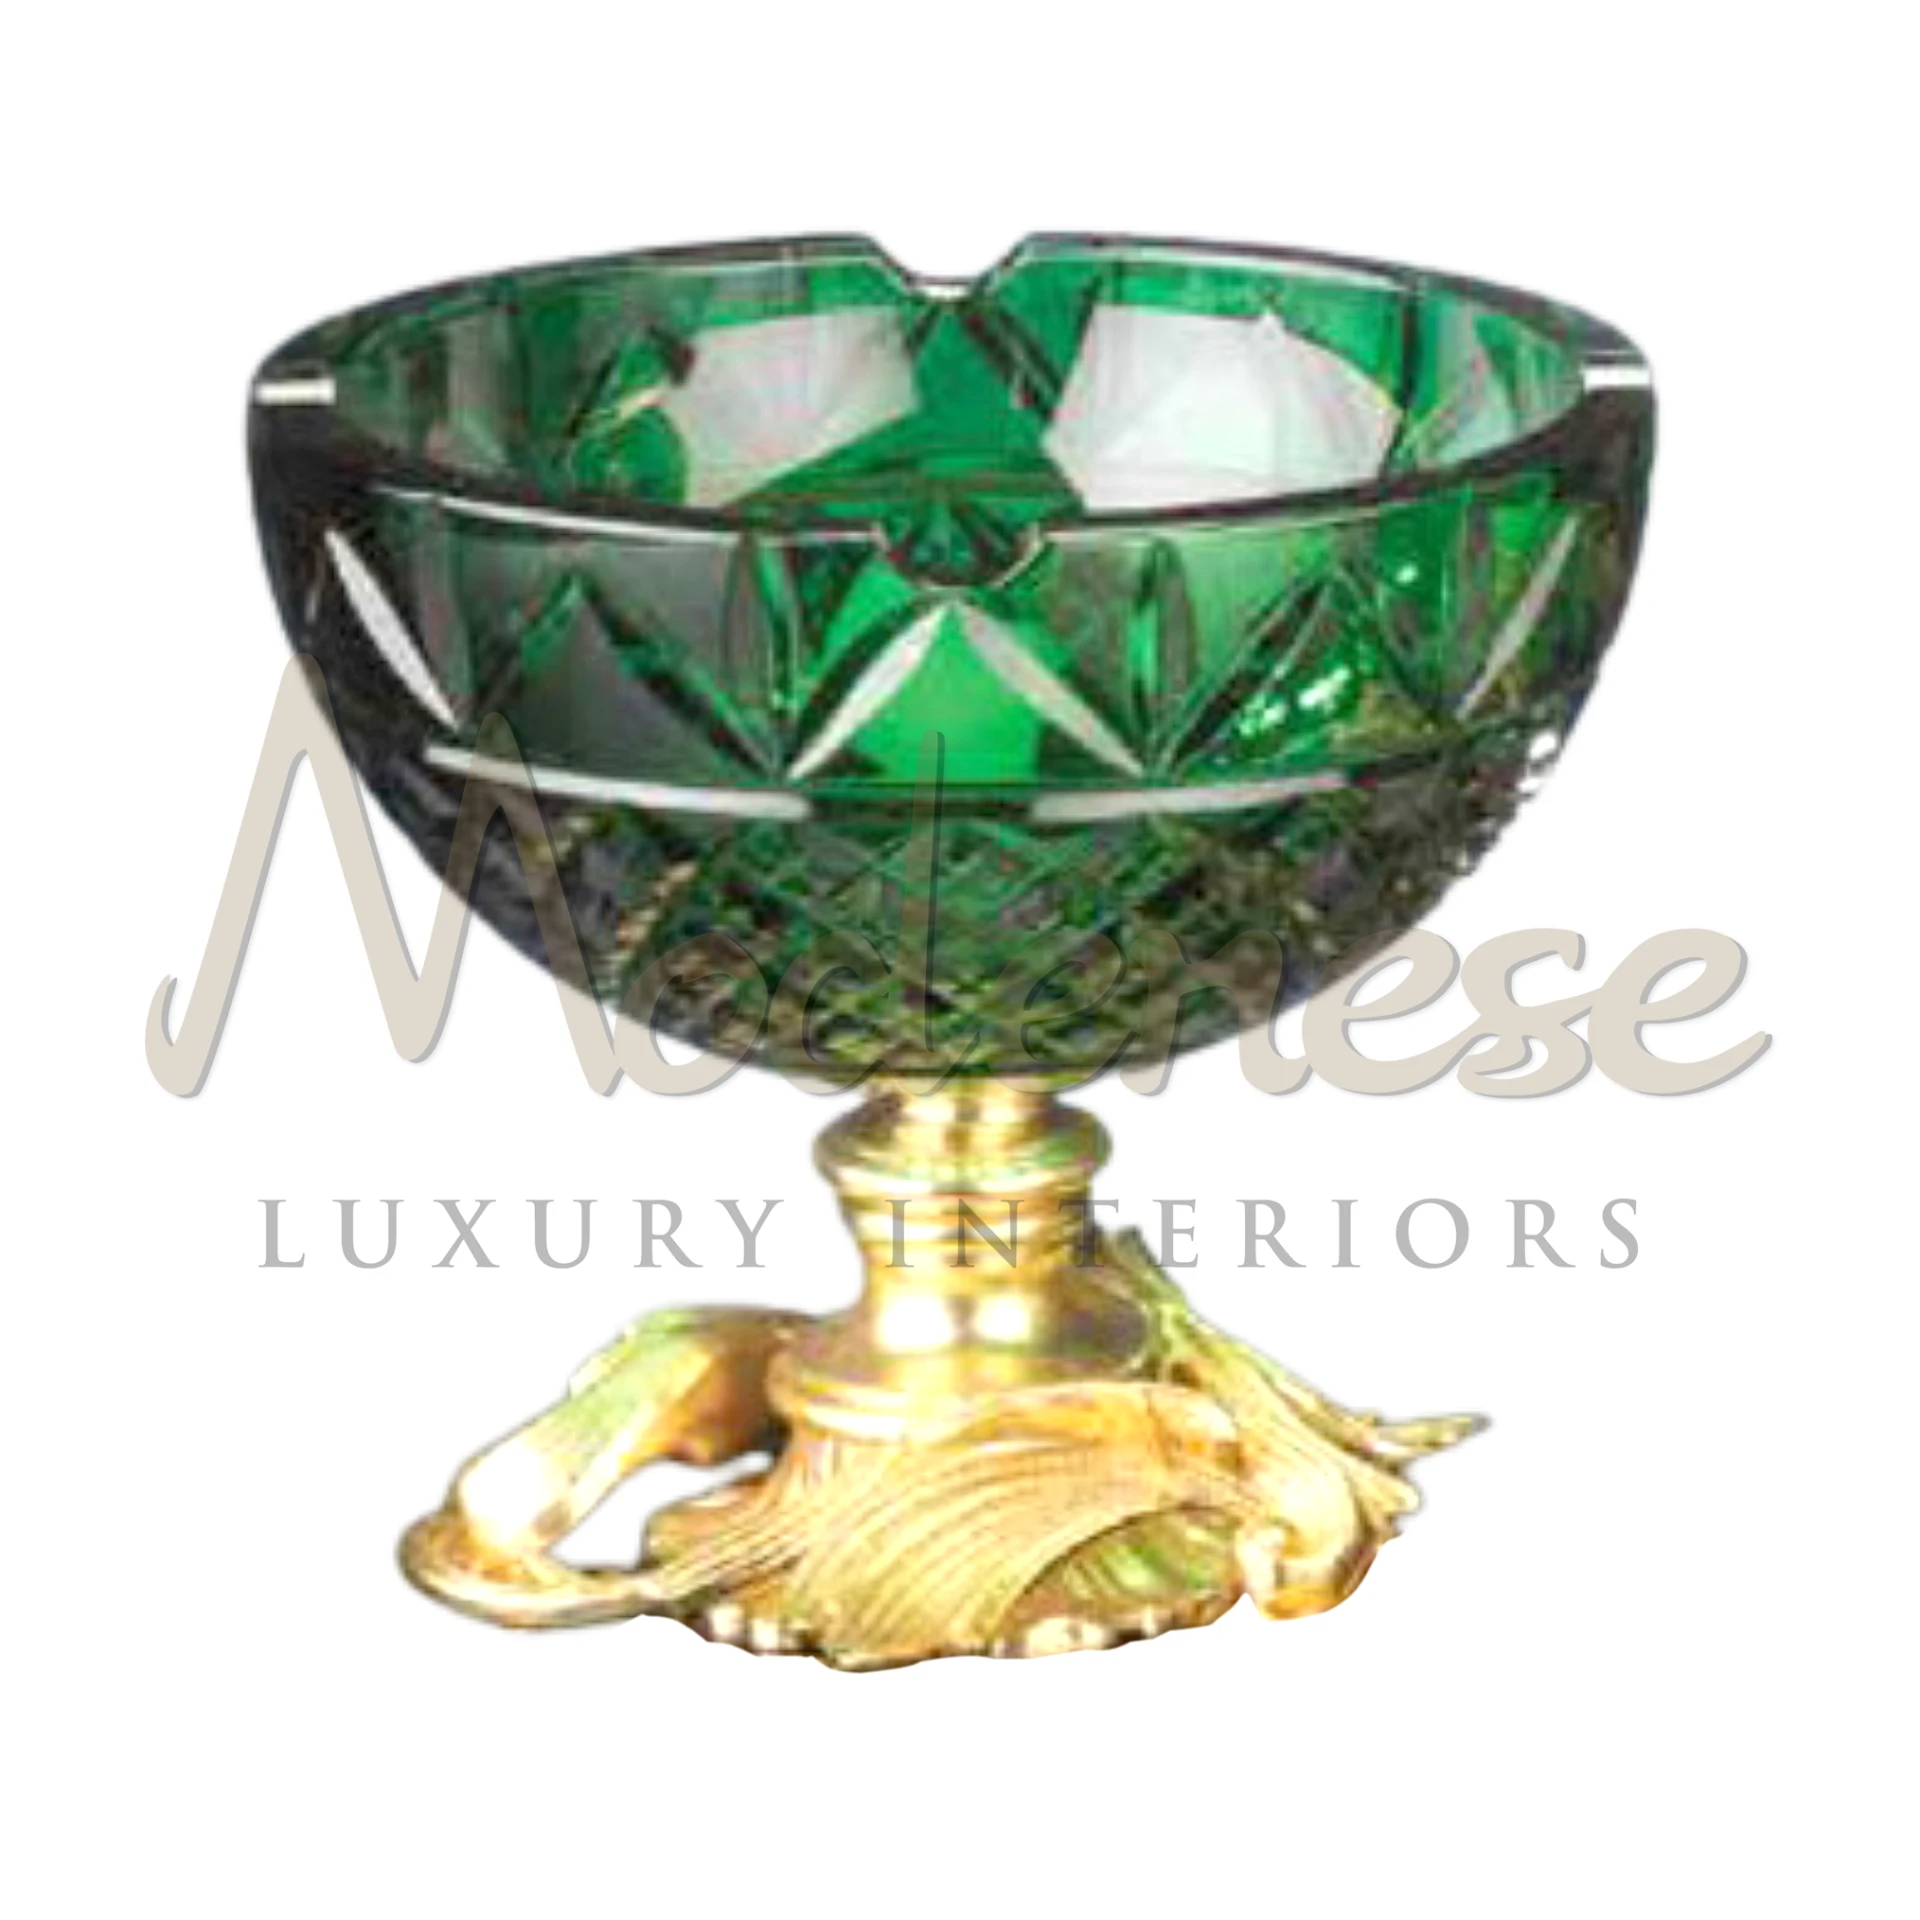 Luxury Emerald Crystal Bowl - Enhance home decor with elegance and luxury.